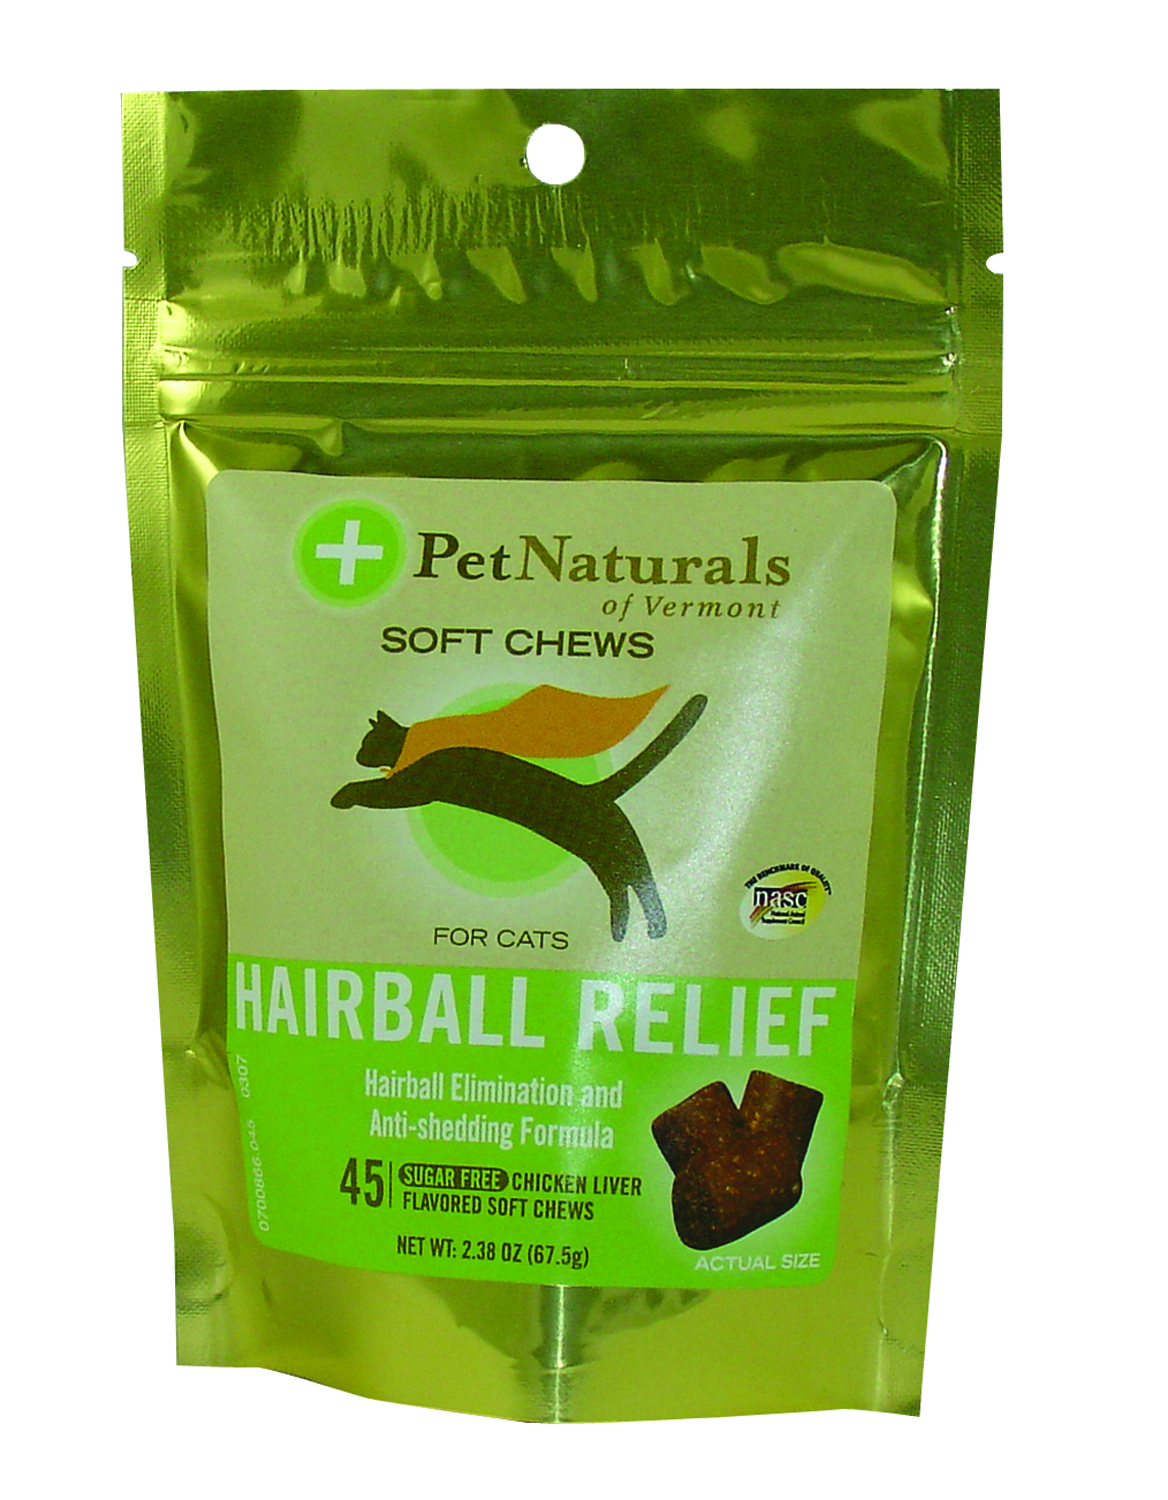 HAIRBALL RELIEF SOFT CHEWS